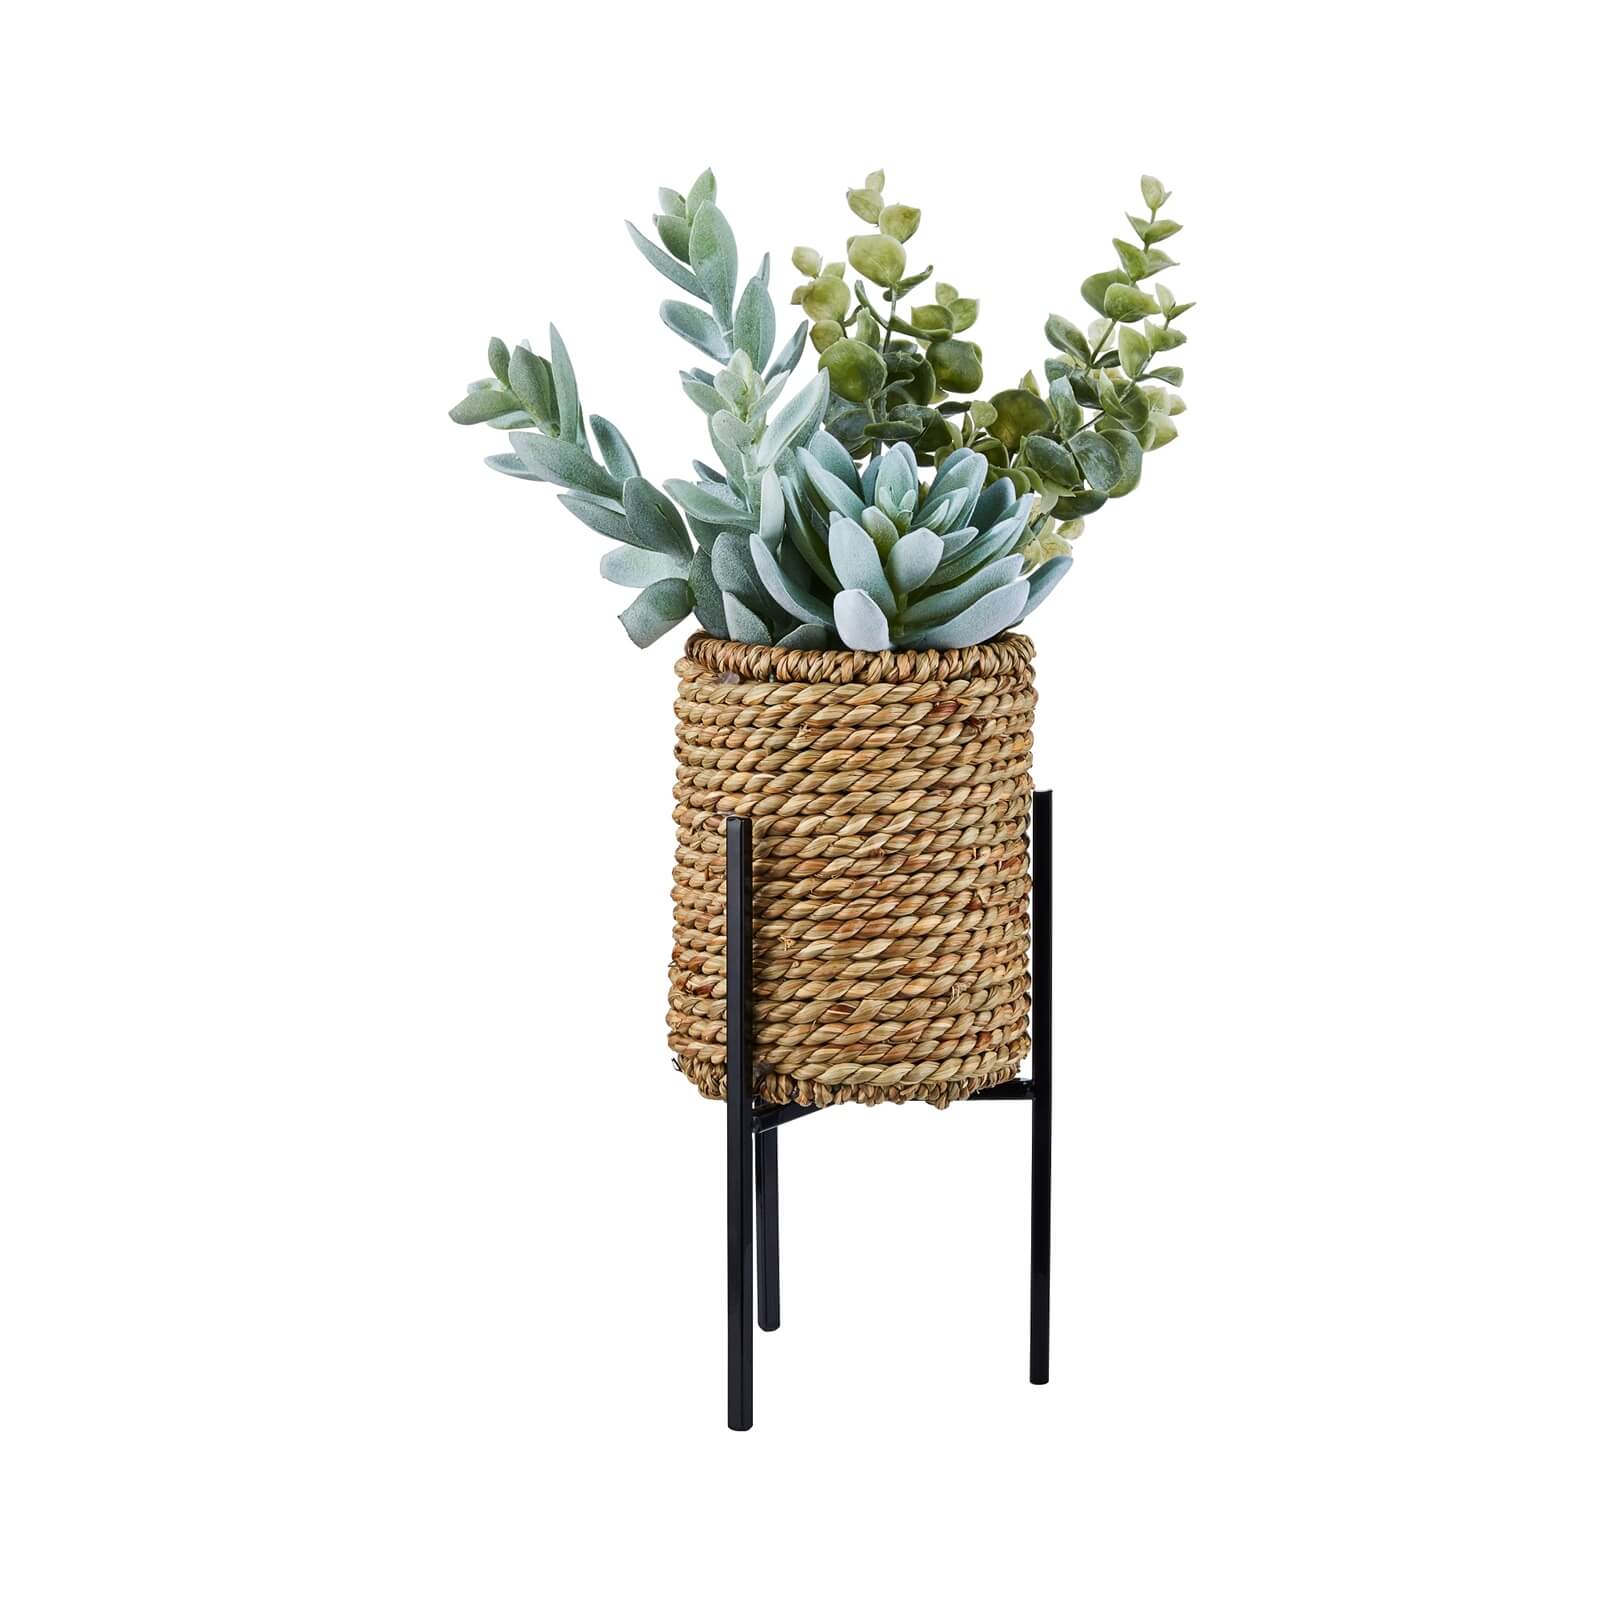 Succulent in Ratten Basket with Stand